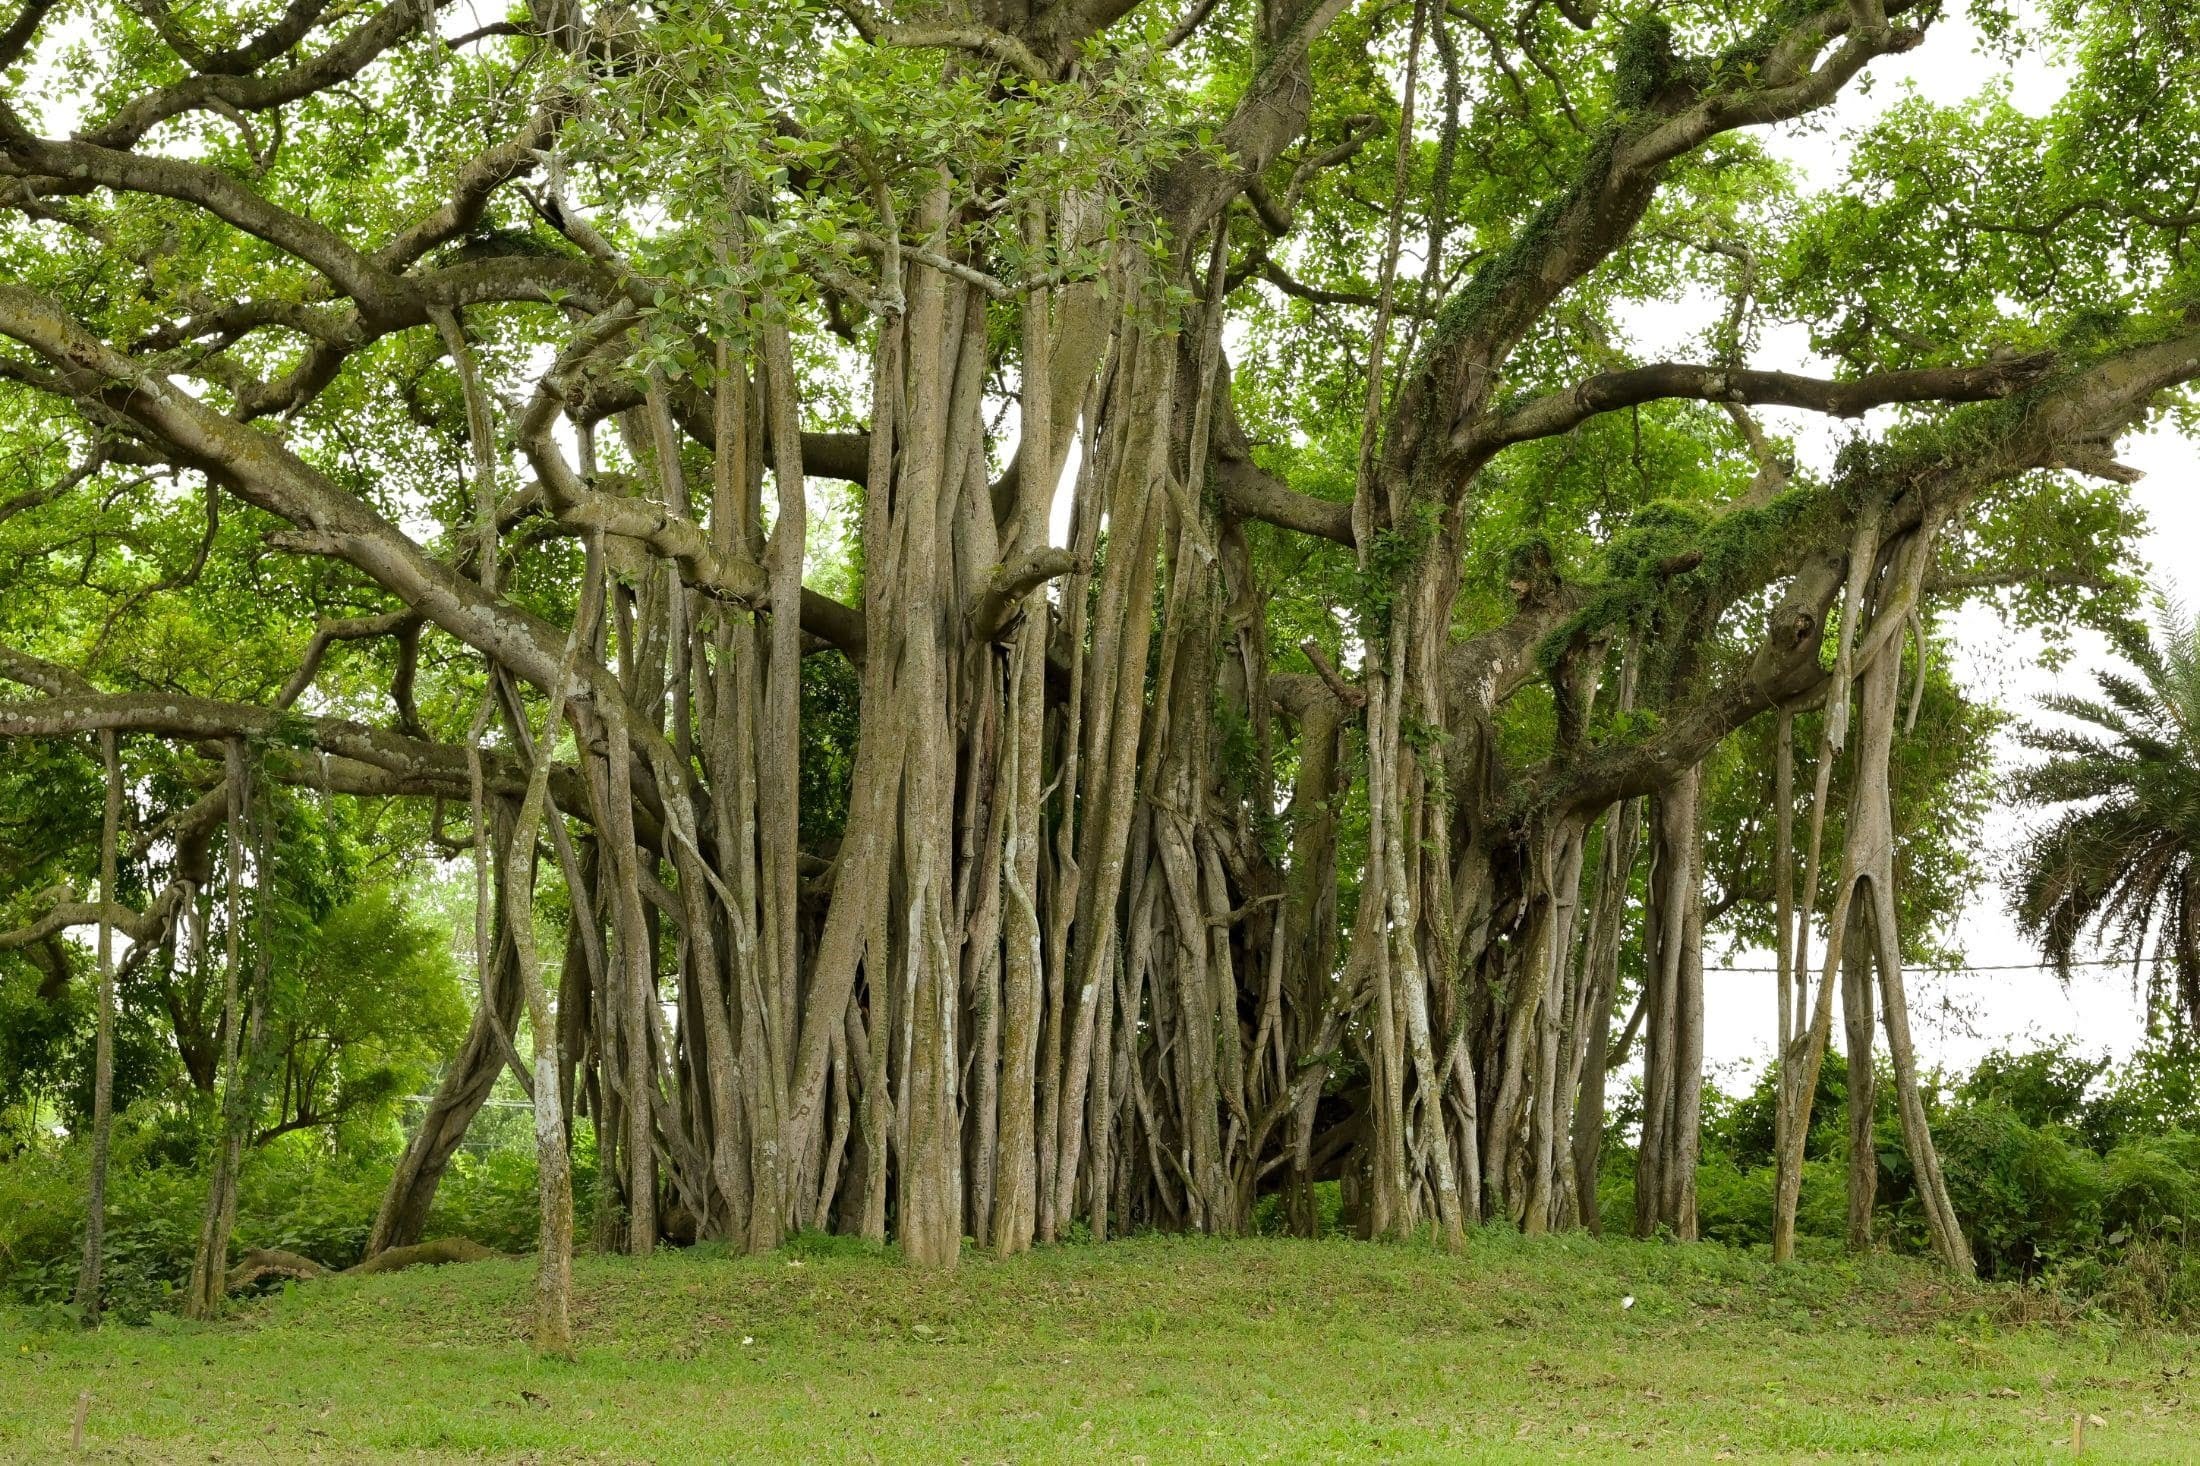 Seychelles Banyan Tree with many unique branches.